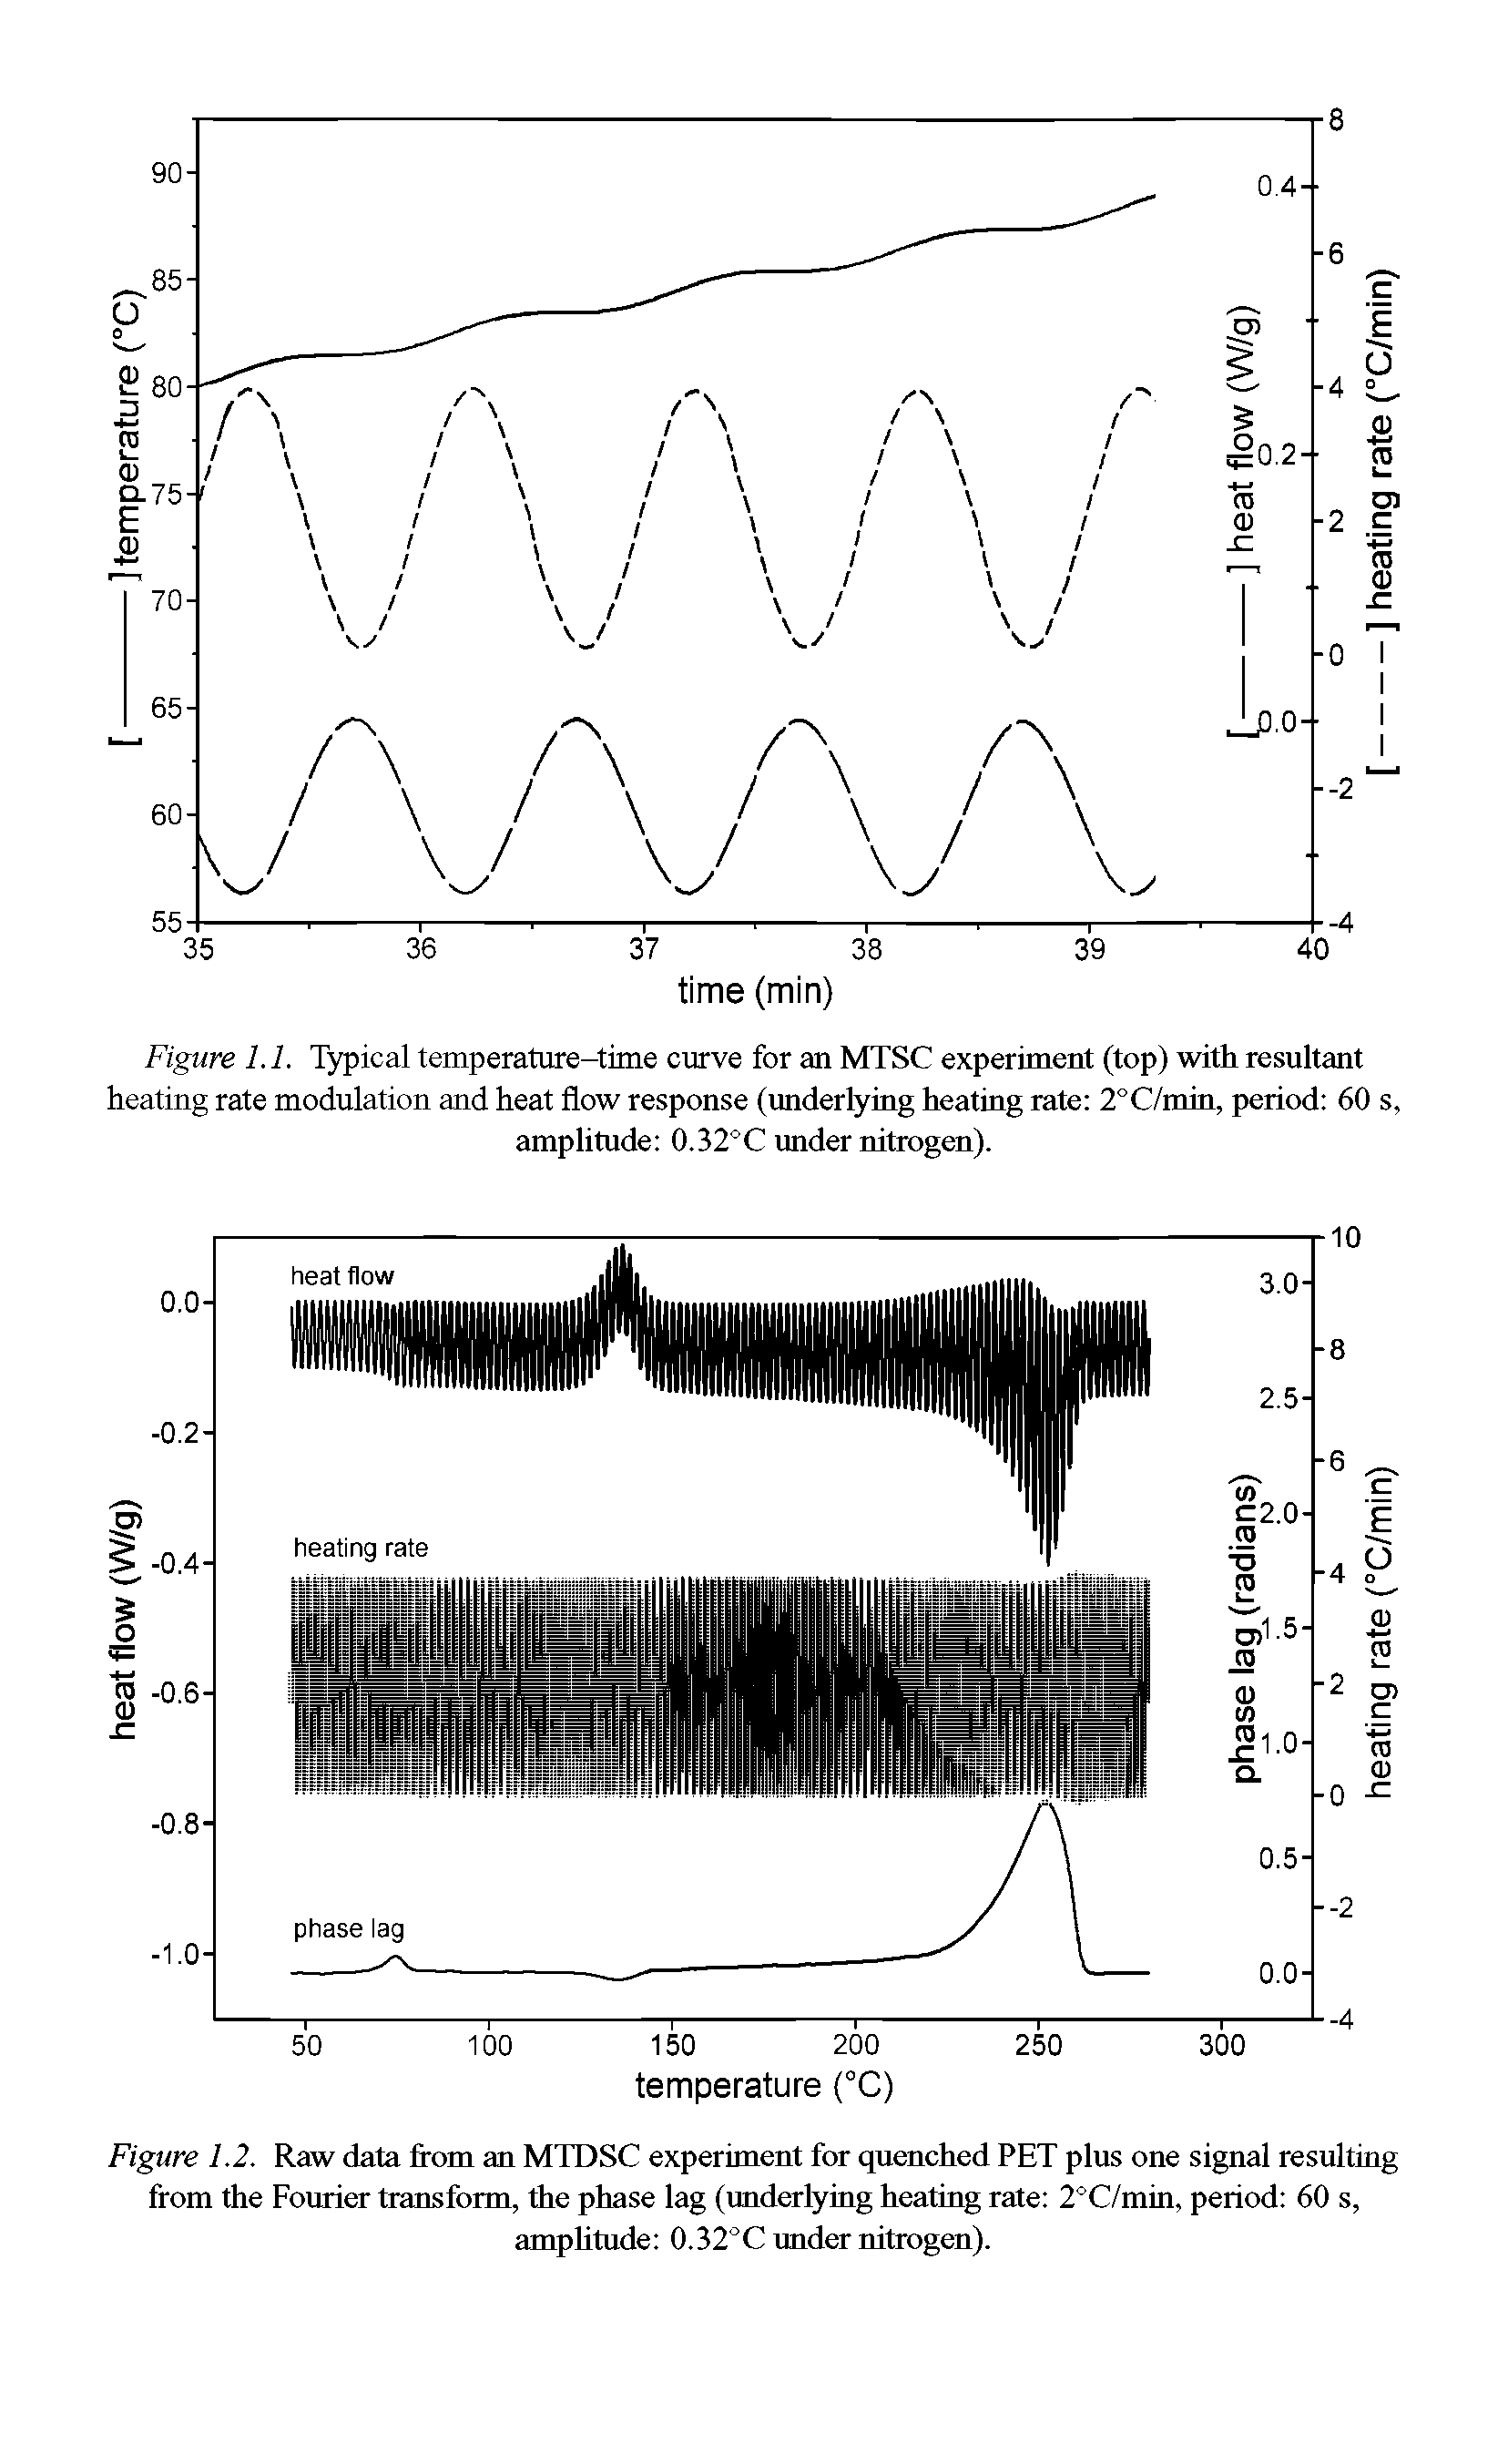 Figure 1.2. Raw data from an MTDSC experiment for quenehed PET plus one signal resulting from the Fourier transform, the phase lag (underlying heating rate 2°C/min, period 60 s, amphtude 0.32°C under nitrogen).